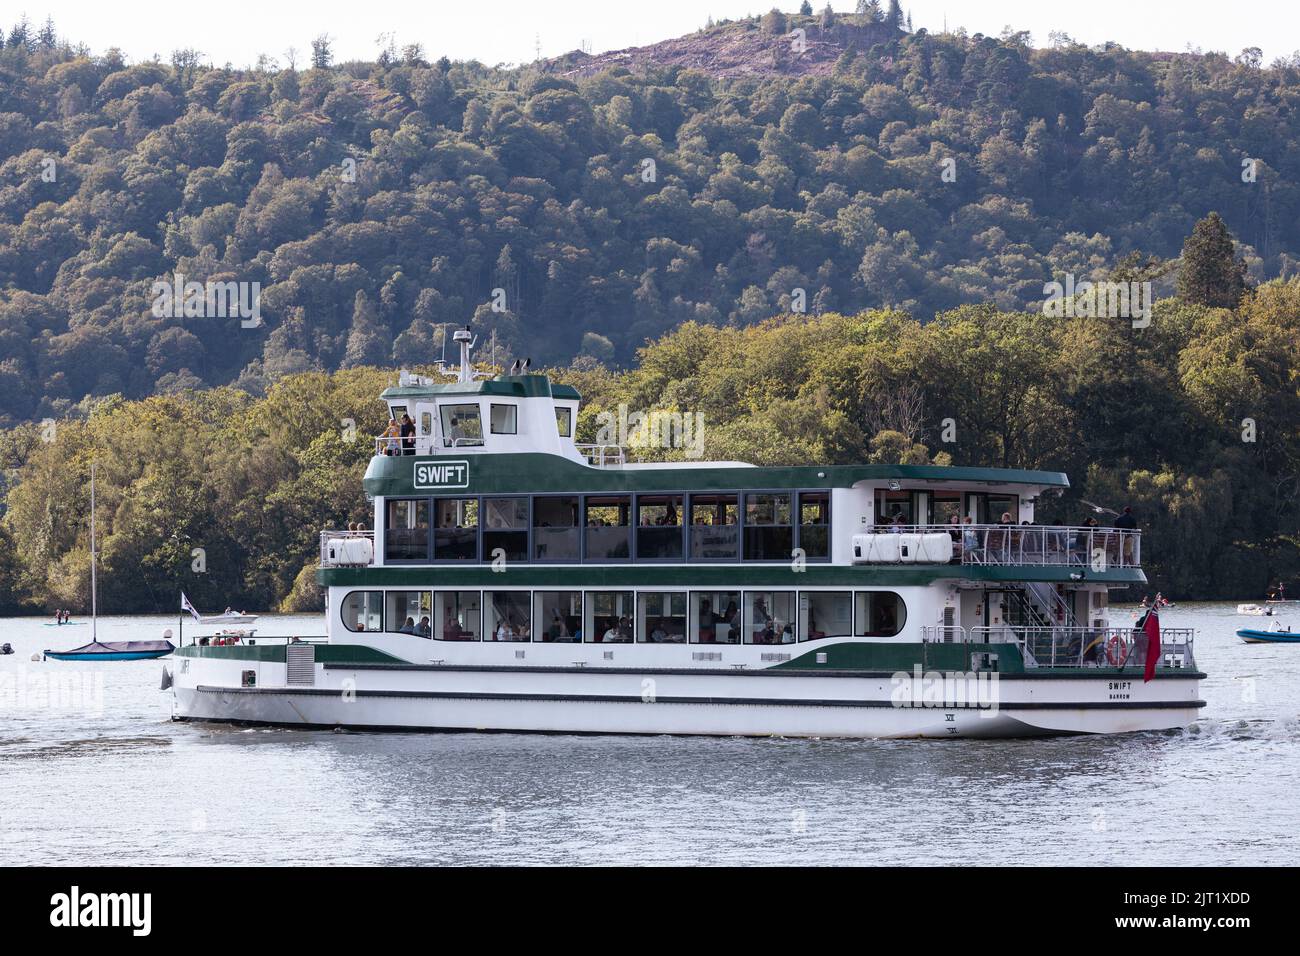 Lake Windermere Cumbria 27th August 2022 .UK Weather Vessels of all sizes & age busy with tourist make the most of the Bank Holiday weekend weather.  The M.V. Swift  .built during lockdown, is 34.4 metres long and uses 2 x Volvo Penta engines to power an electrical propulsion system Credit: Gordon Shoosmith/Alamy Live News Stock Photo